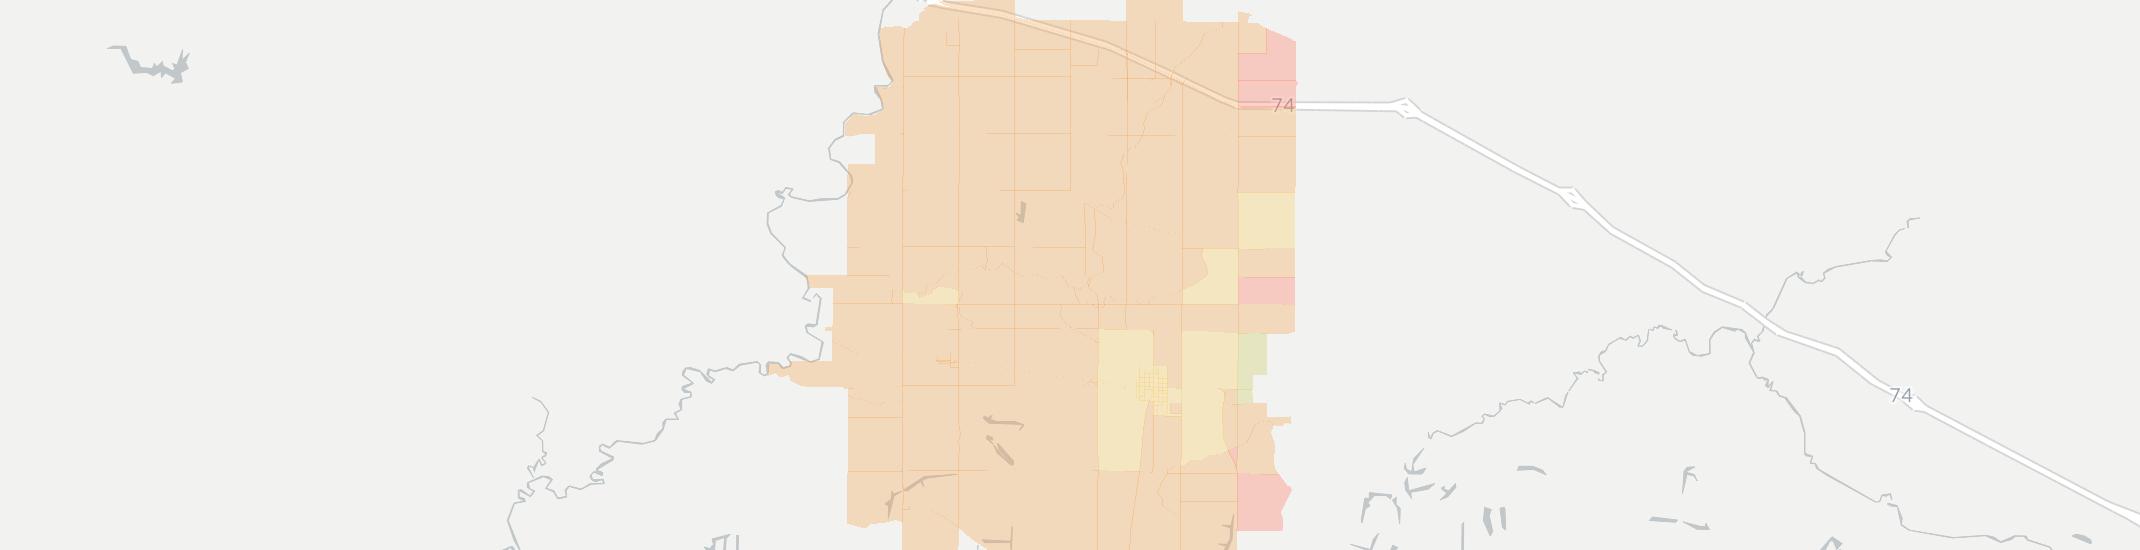 Yates City Internet Competition Map. Click for interactive map.